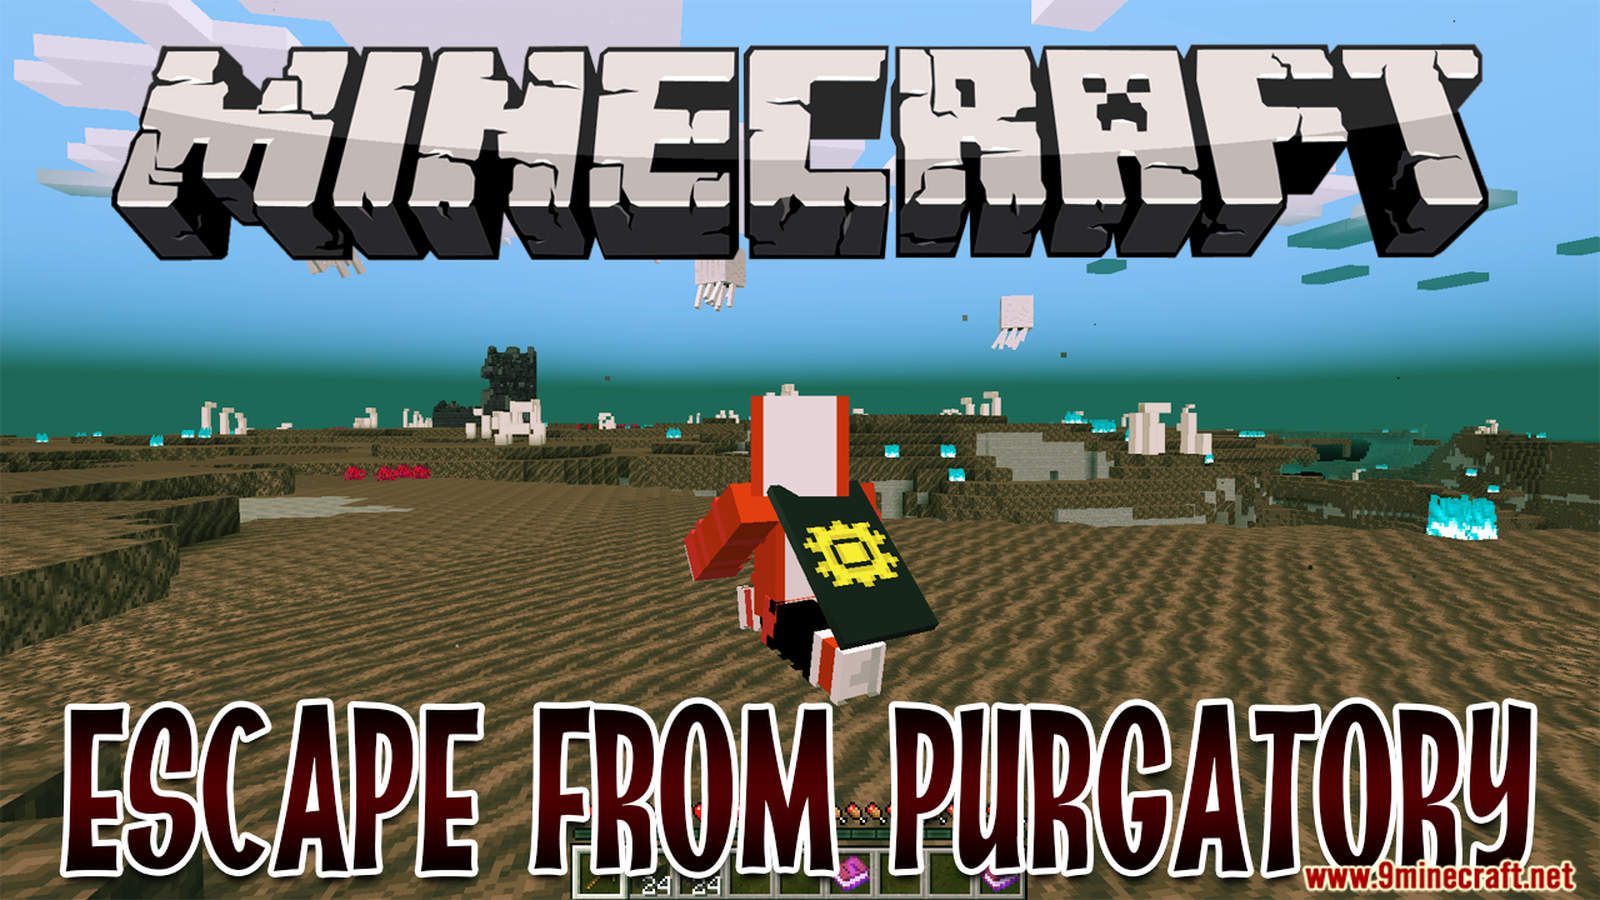 Escape from Purgatory Data Pack 1.17.1, 1.16.5 (Survive and escape) 1